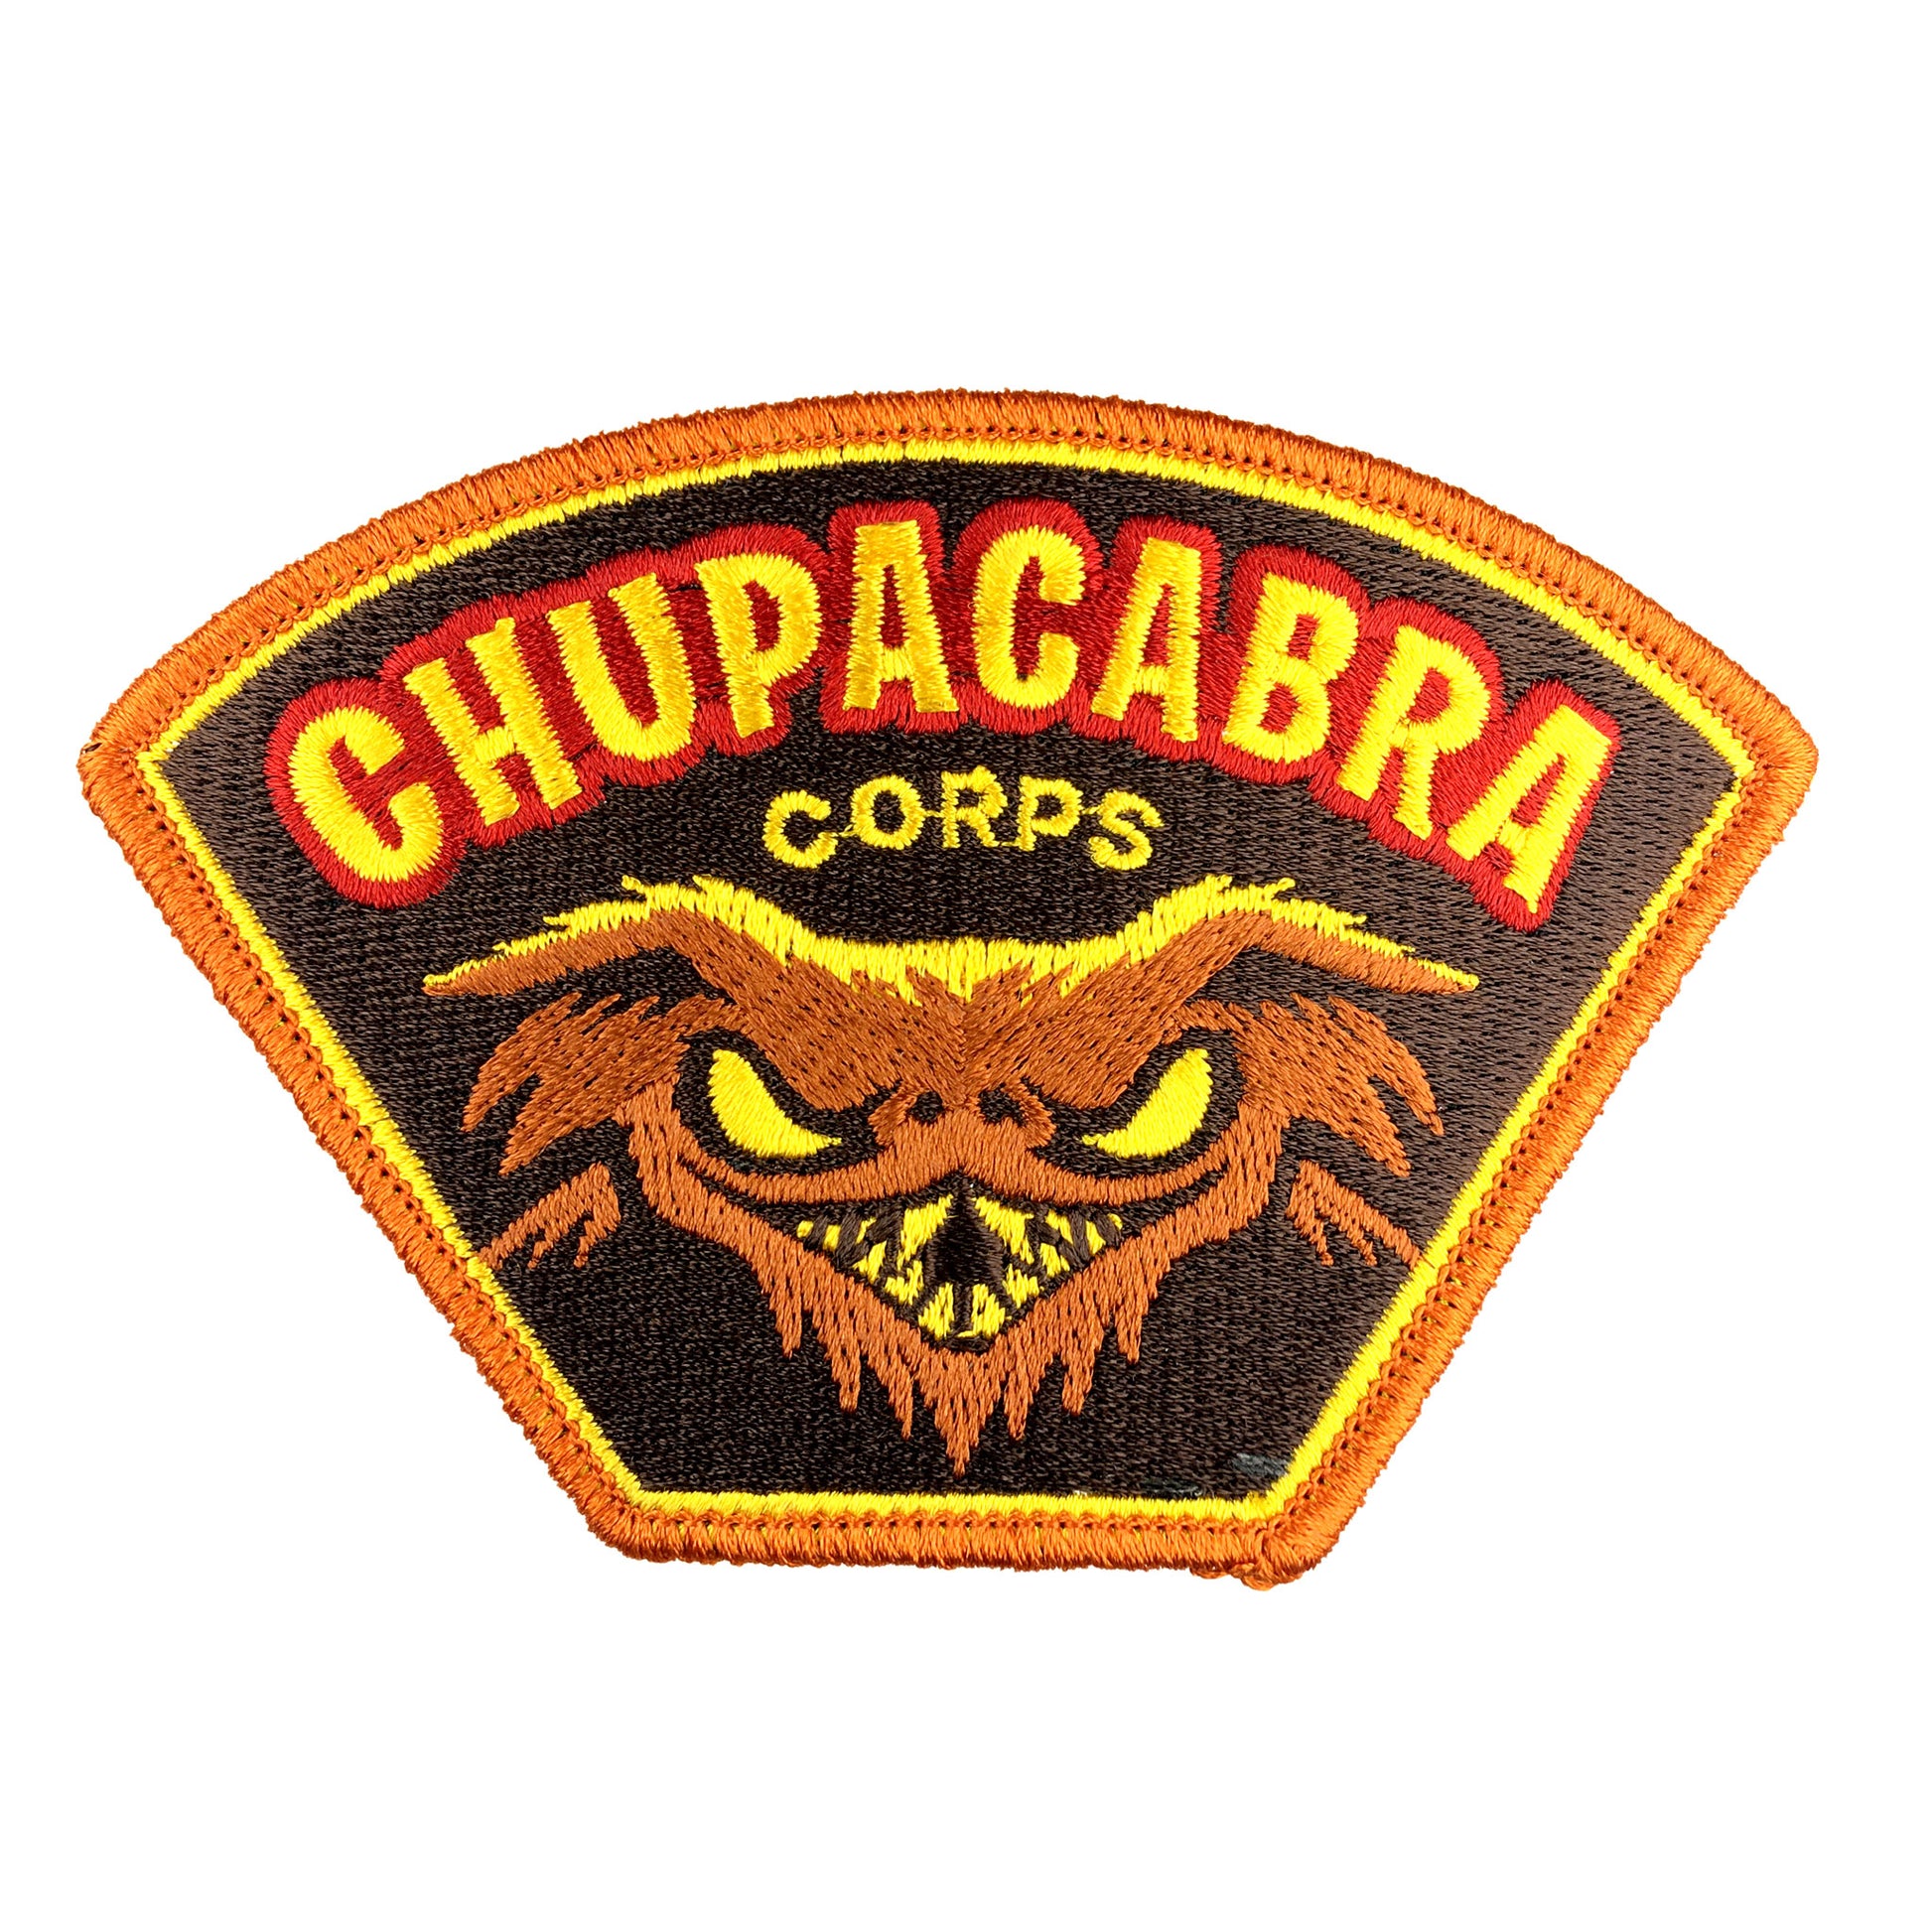 Chupacabra Corps cryptozoology military embroidered morale patch by Monsterologist